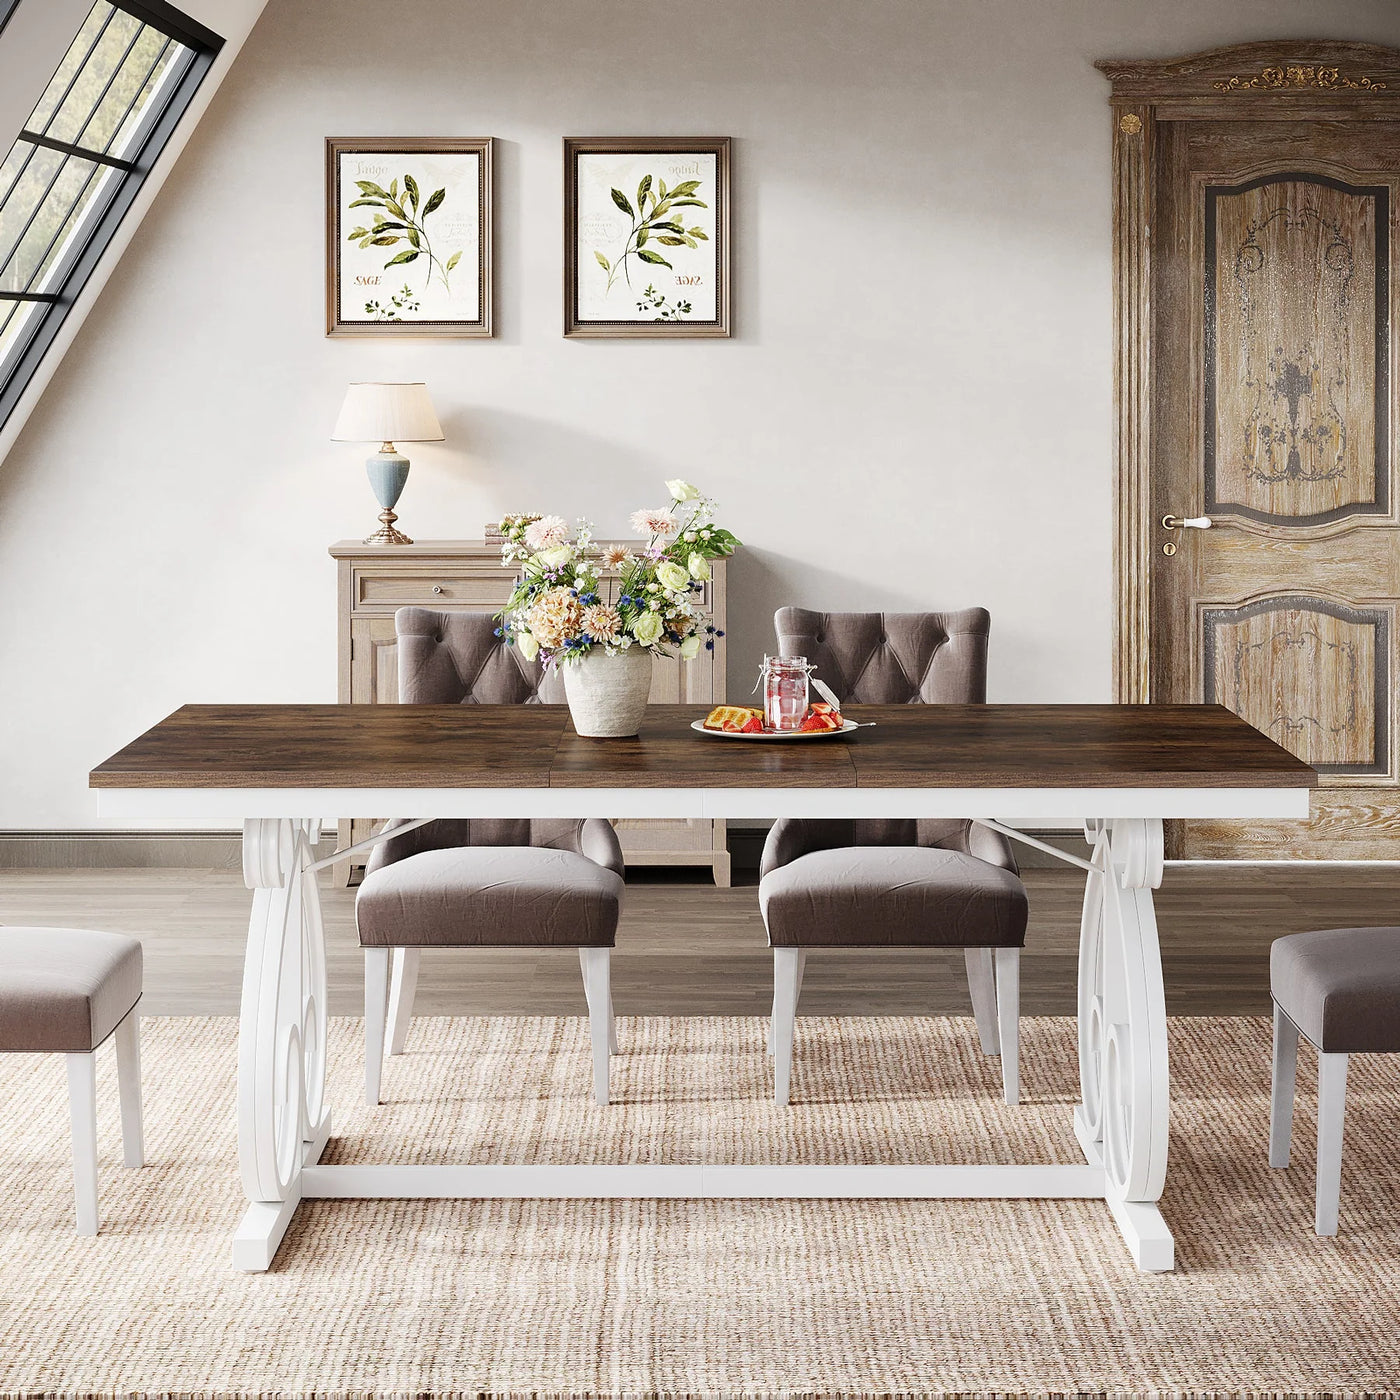 Aidra Wooden Dining Table | Vintage Rectangular Kitchen Table with Scrolled Legs